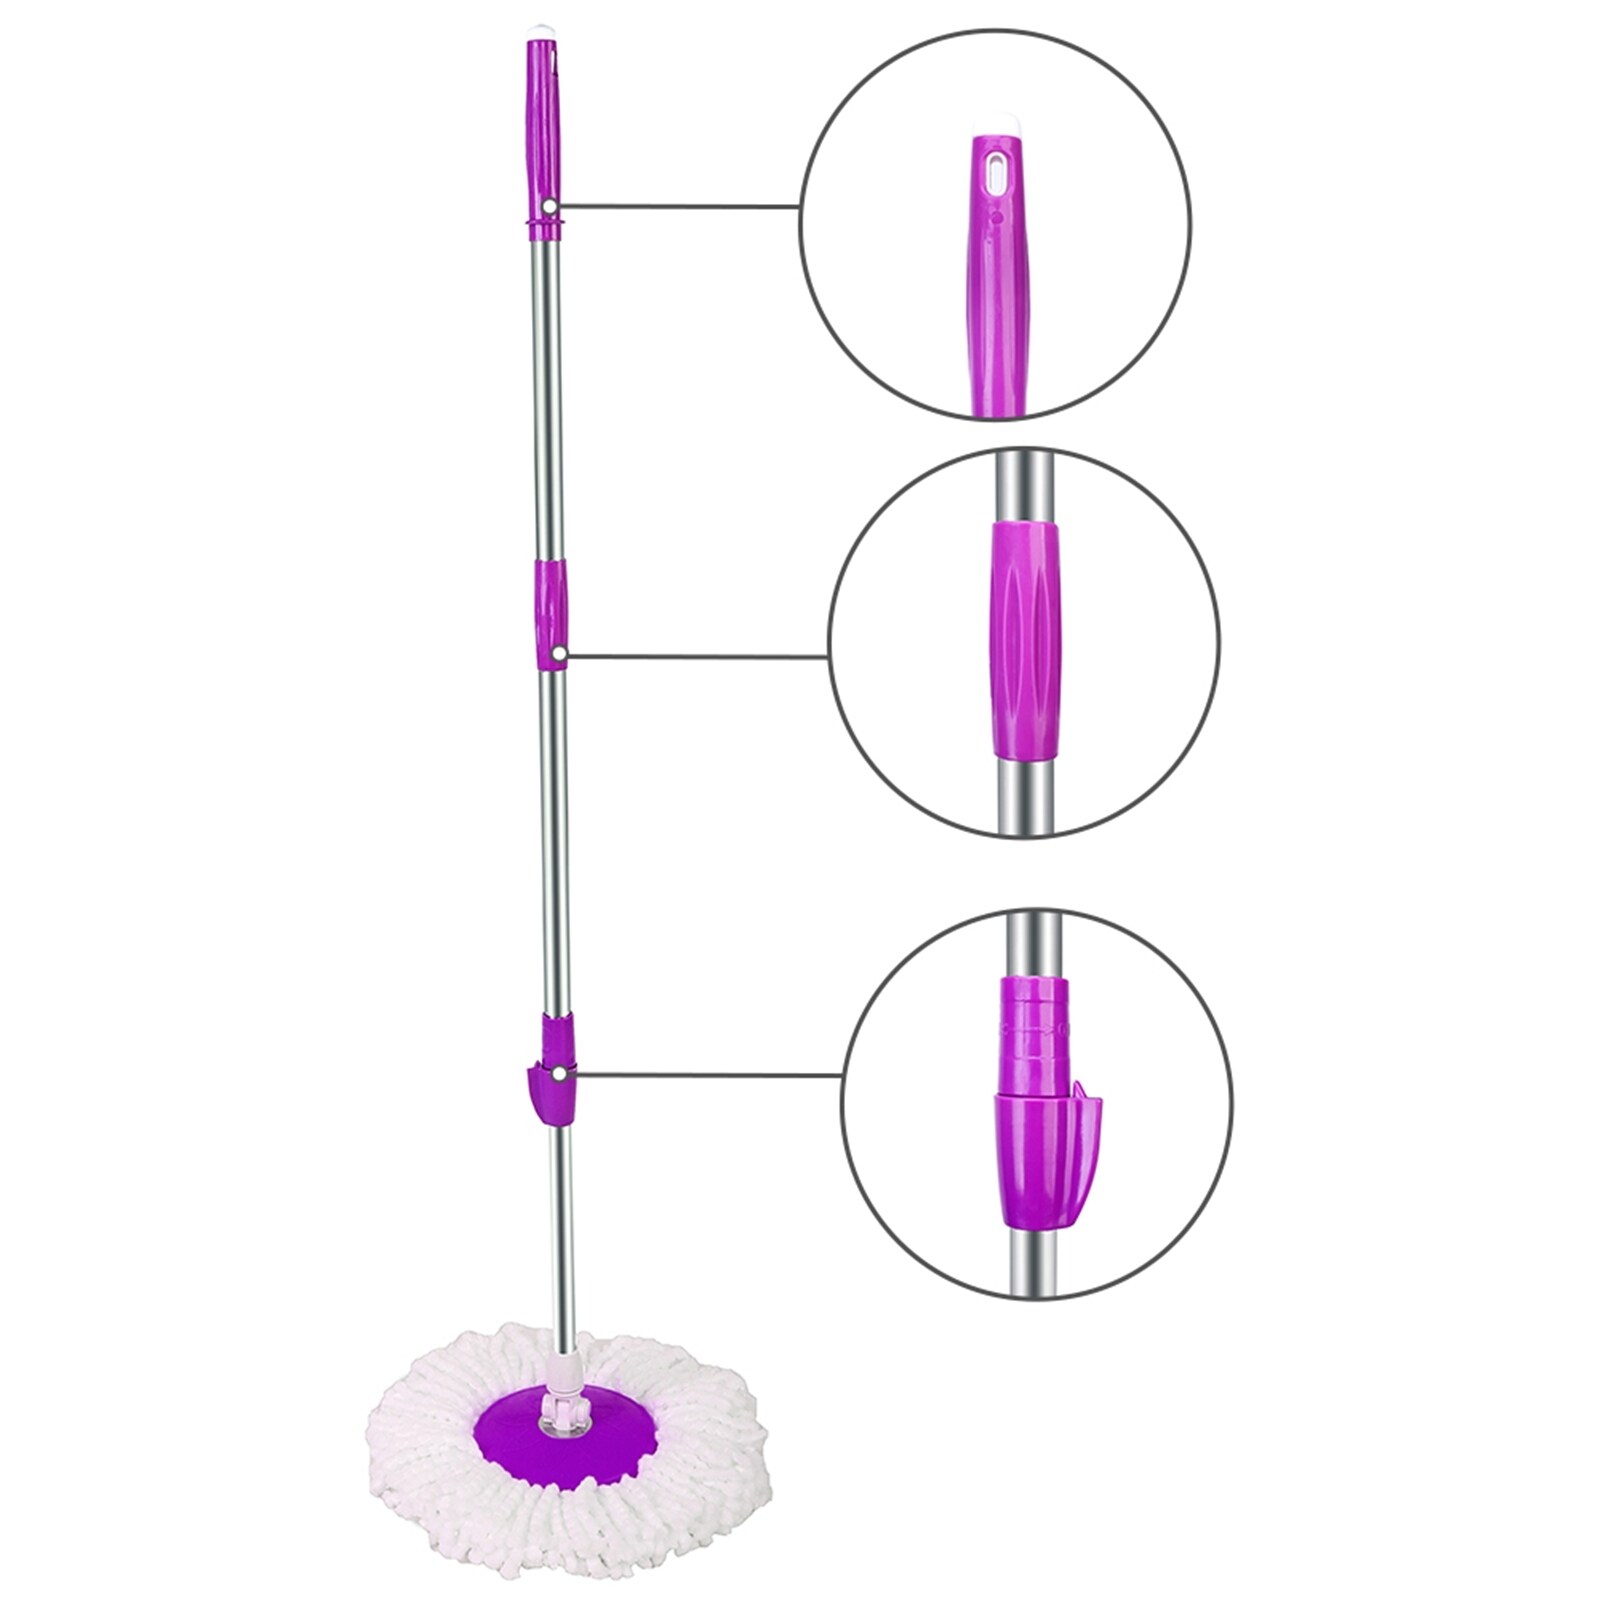 https://ak1.ostkcdn.com/images/products/is/images/direct/a09261641864331eeaad99ea4738d9e9fe3bb8fa/360%C2%B0-Spin-Mop-with-Bucket-%26-Dual-Mop-Heads.jpg